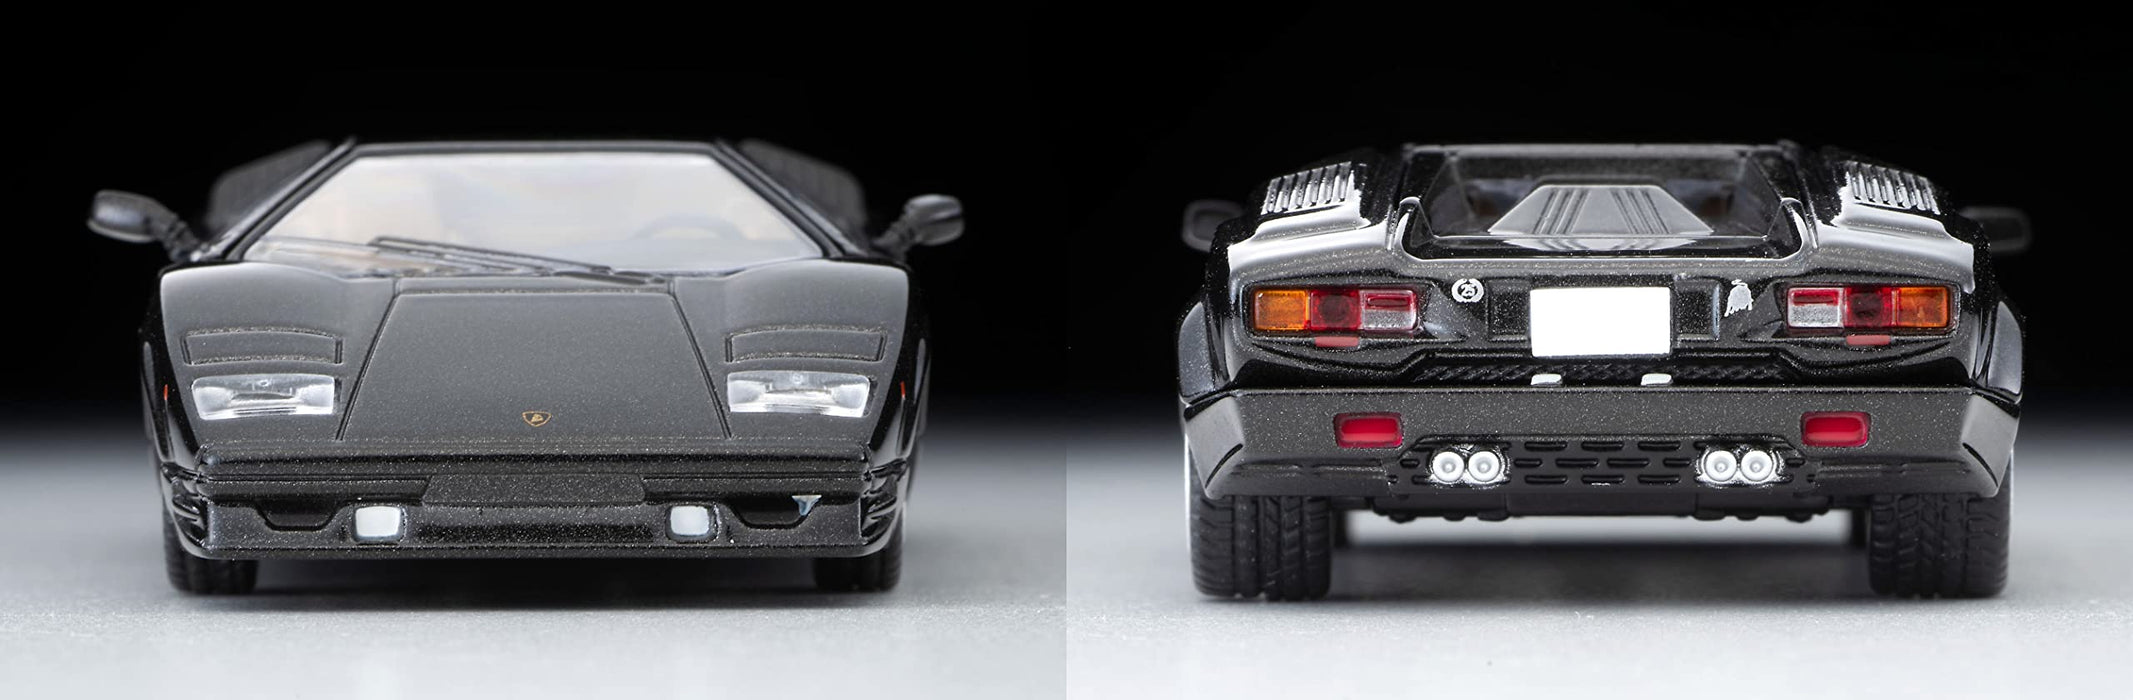 Tomytec 1/64 Scale Lamborghini Countach 25th Anniversary Tomica Limited Vintage Neo - Black